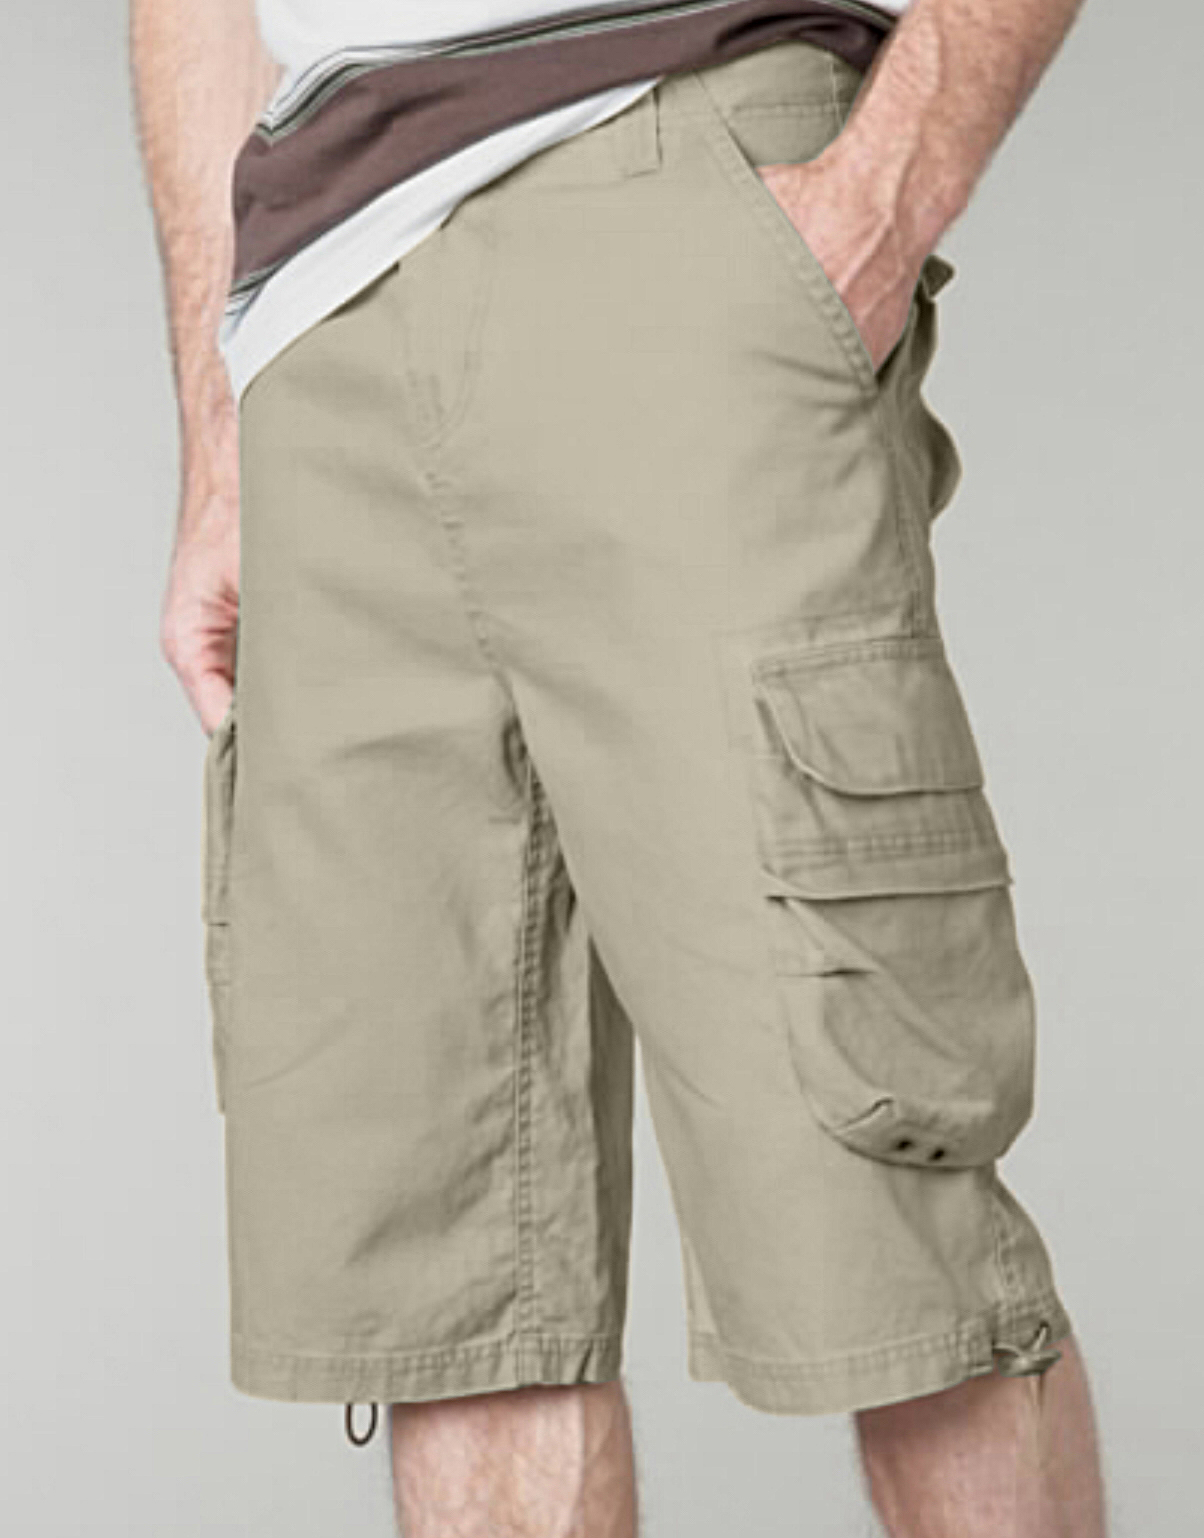 One college lacrosse team is having a retirement party for cargo shorts ...